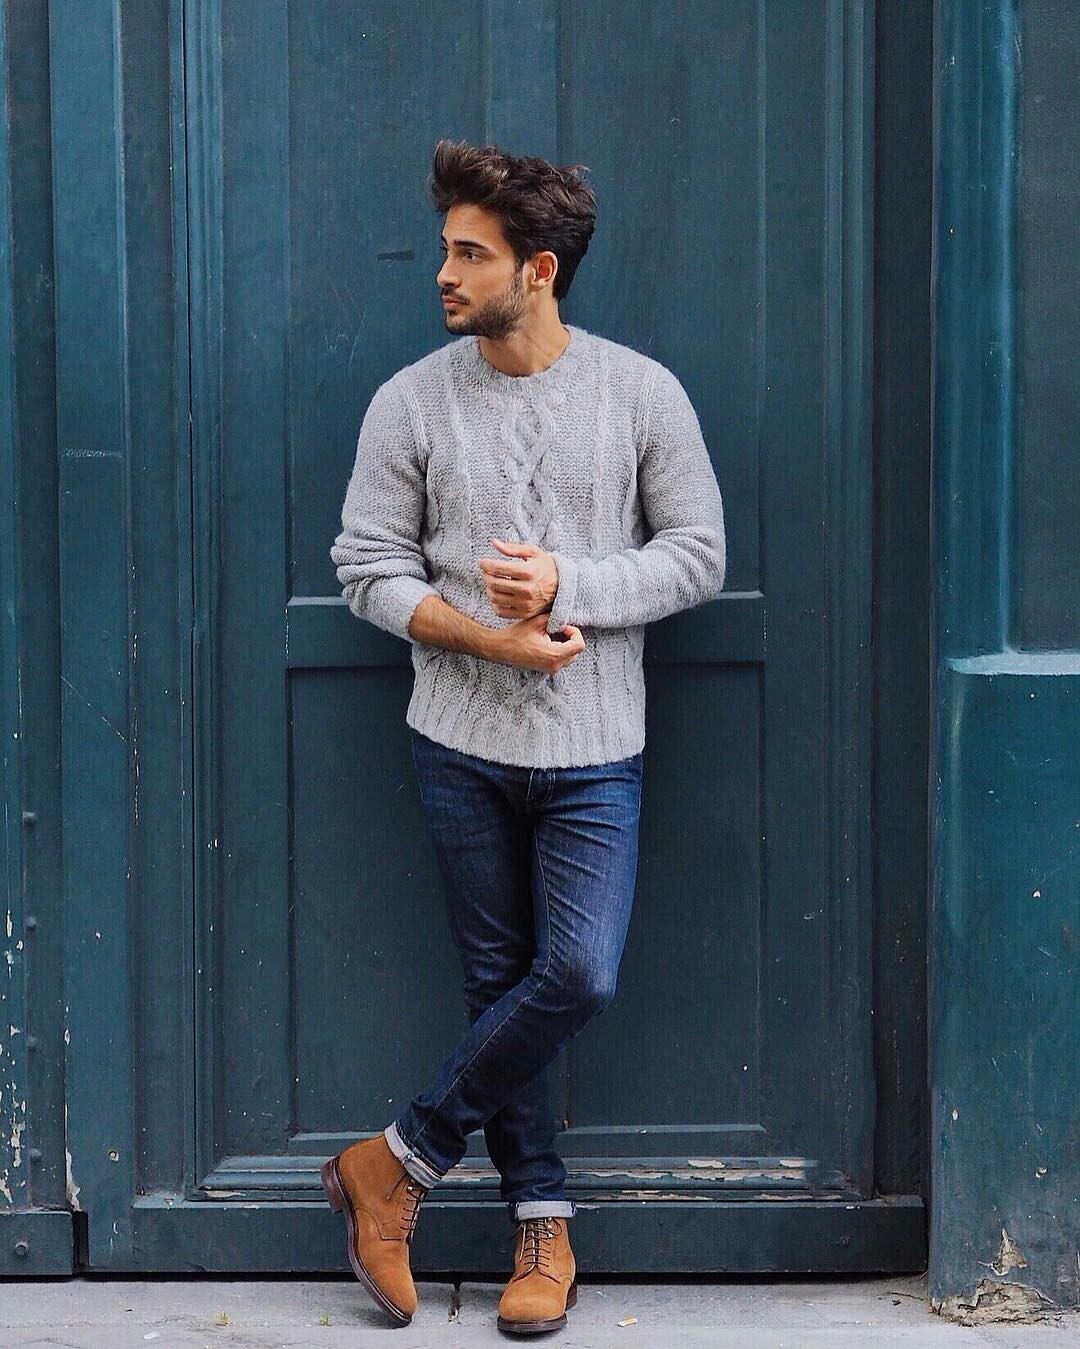 Winter Outfits for Men - Layering is KING. - The Indian Gent - Winter Outfits for Men - Layering is KING. - The Indian Gent -   18 style Mens photography ideas